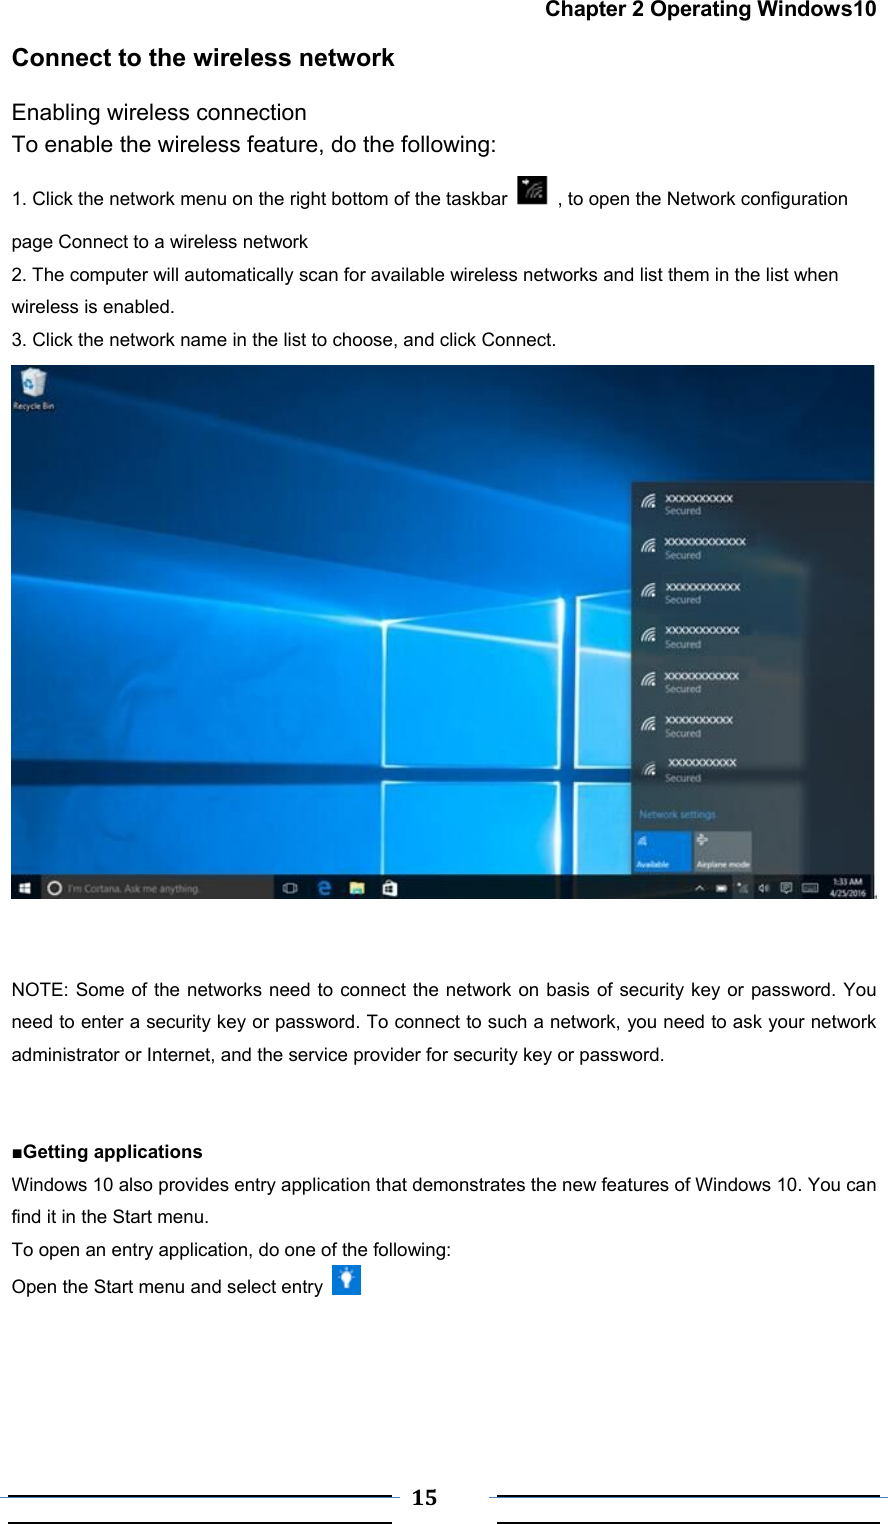  15 Chapter 2 Operating Windows10 Connect to the wireless network Enabling wireless connection To enable the wireless feature, do the following: 1. Click the network menu on the right bottom of the taskbar    , to open the Network configuration page Connect to a wireless network 2. The computer will automatically scan for available wireless networks and list them in the list when wireless is enabled. 3. Click the network name in the list to choose, and click Connect.    NOTE: Some of the networks need to connect the network on basis of security key or password. You need to enter a security key or password. To connect to such a network, you need to ask your network administrator or Internet, and the service provider for security key or password.   ■Getting applications Windows 10 also provides entry application that demonstrates the new features of Windows 10. You can find it in the Start menu. To open an entry application, do one of the following:   Open the Start menu and select entry       